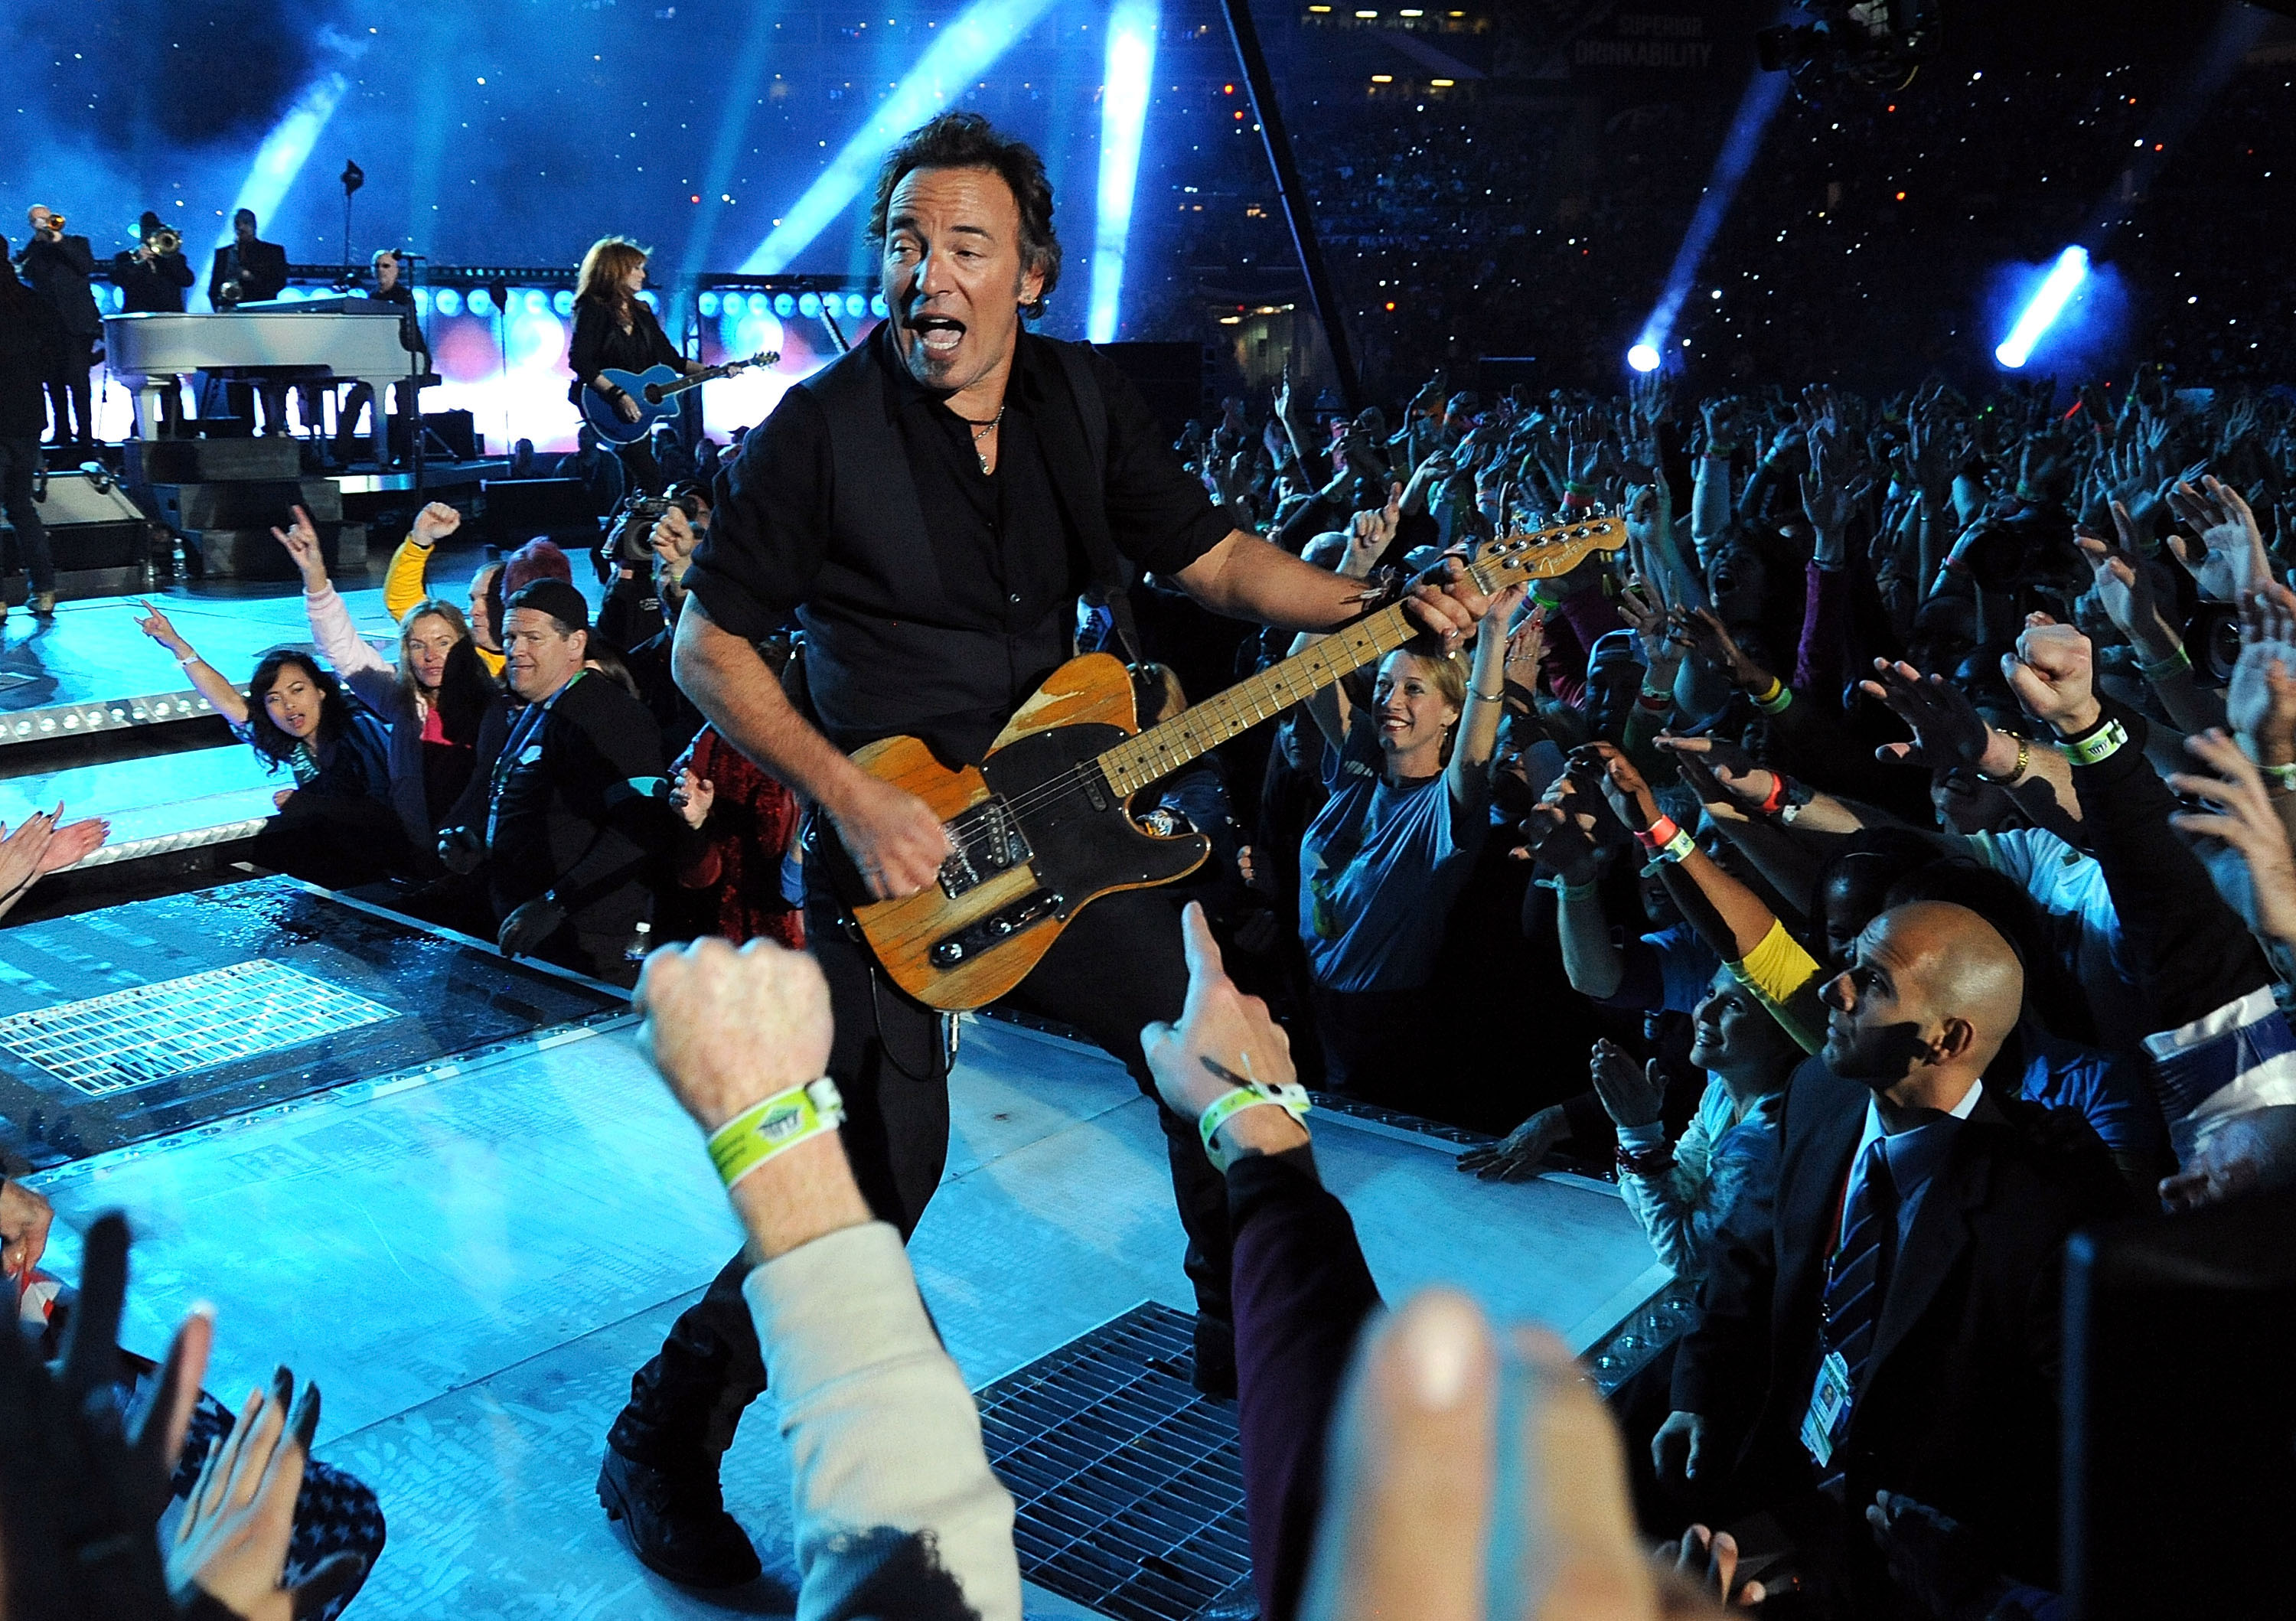 Bruce Springsteen and the E Street Band  perform during Super Bowl XLIII on Feb. 1, 2009 in Tampa, Fla.